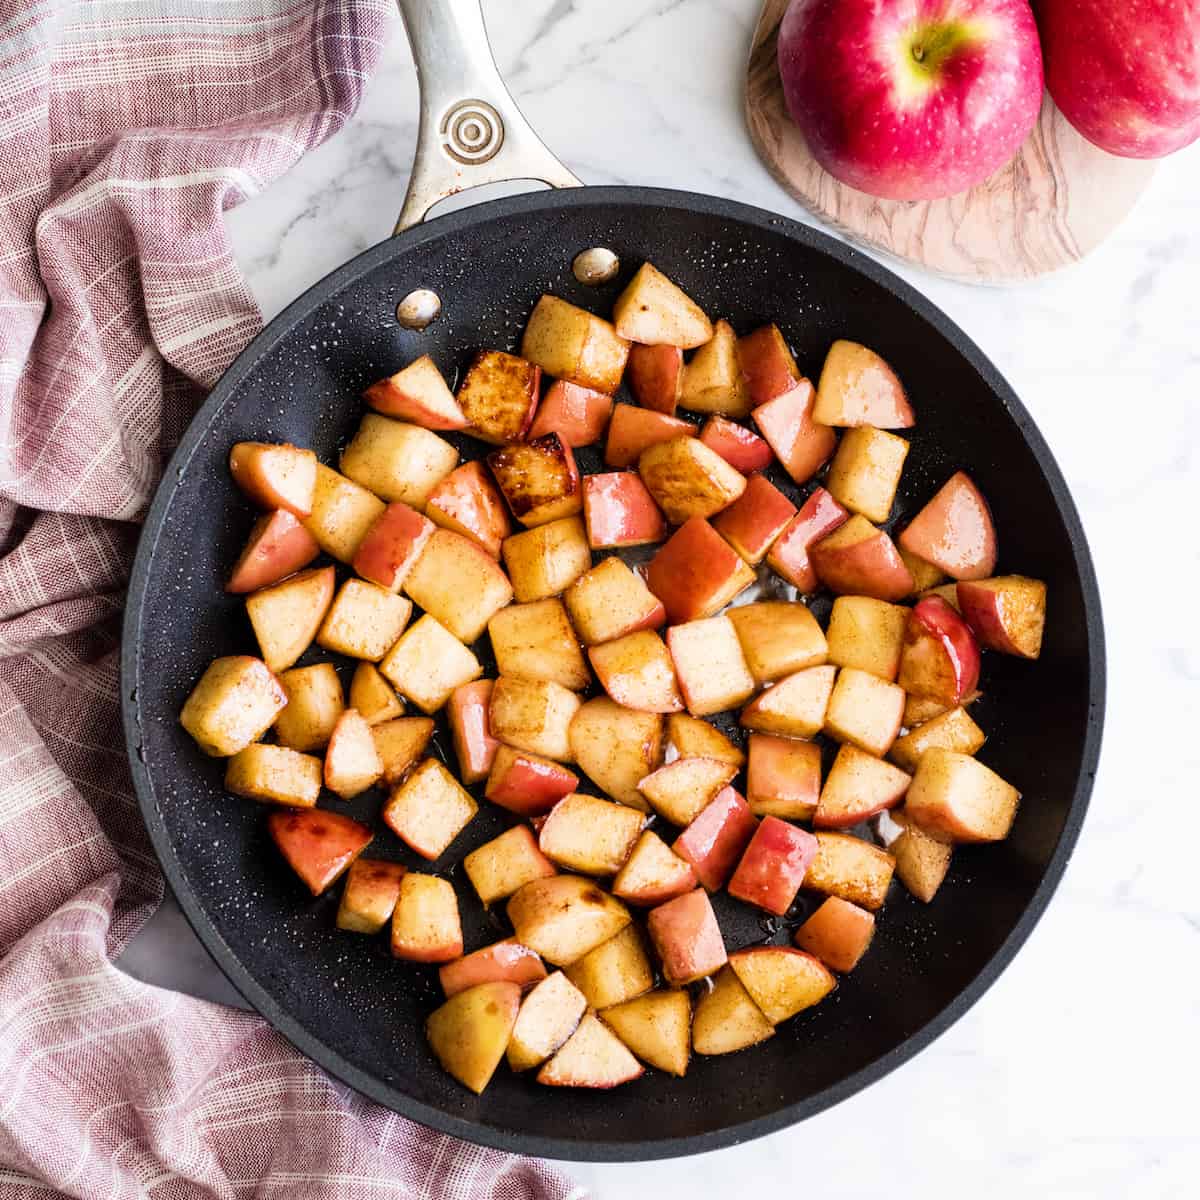 Overhead view of sautéed cinnamon apples in a non-stick fry pan